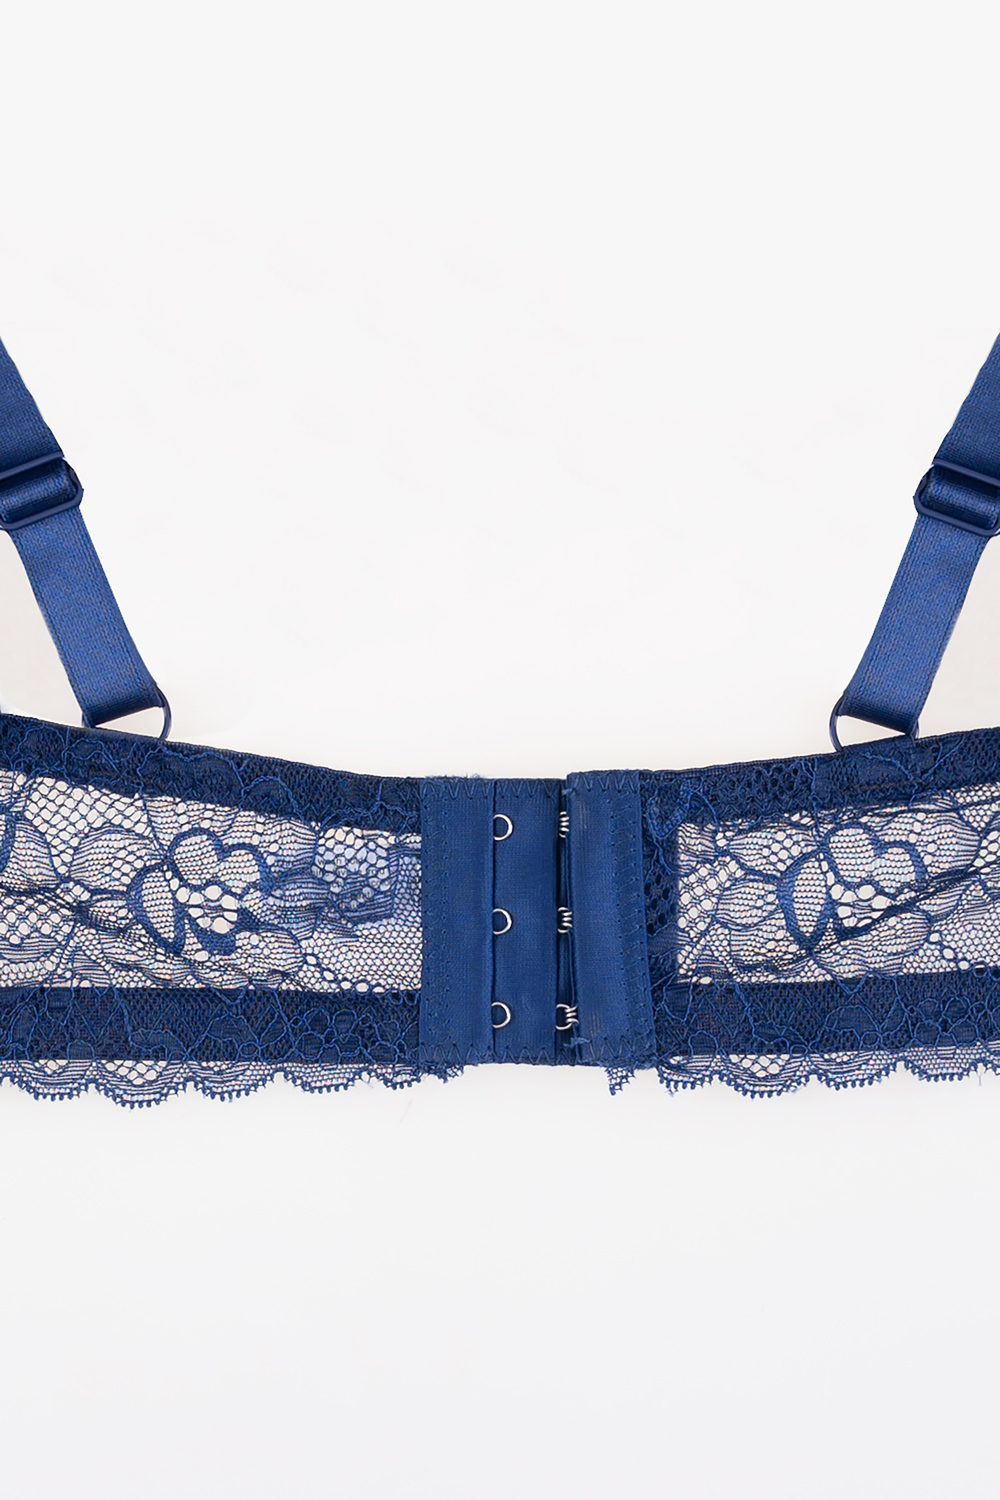 Full coverage lace bra set with high cut coordinated brief - Navy blue -  Plus Size. Colour: navy blue. Size: 40d/8